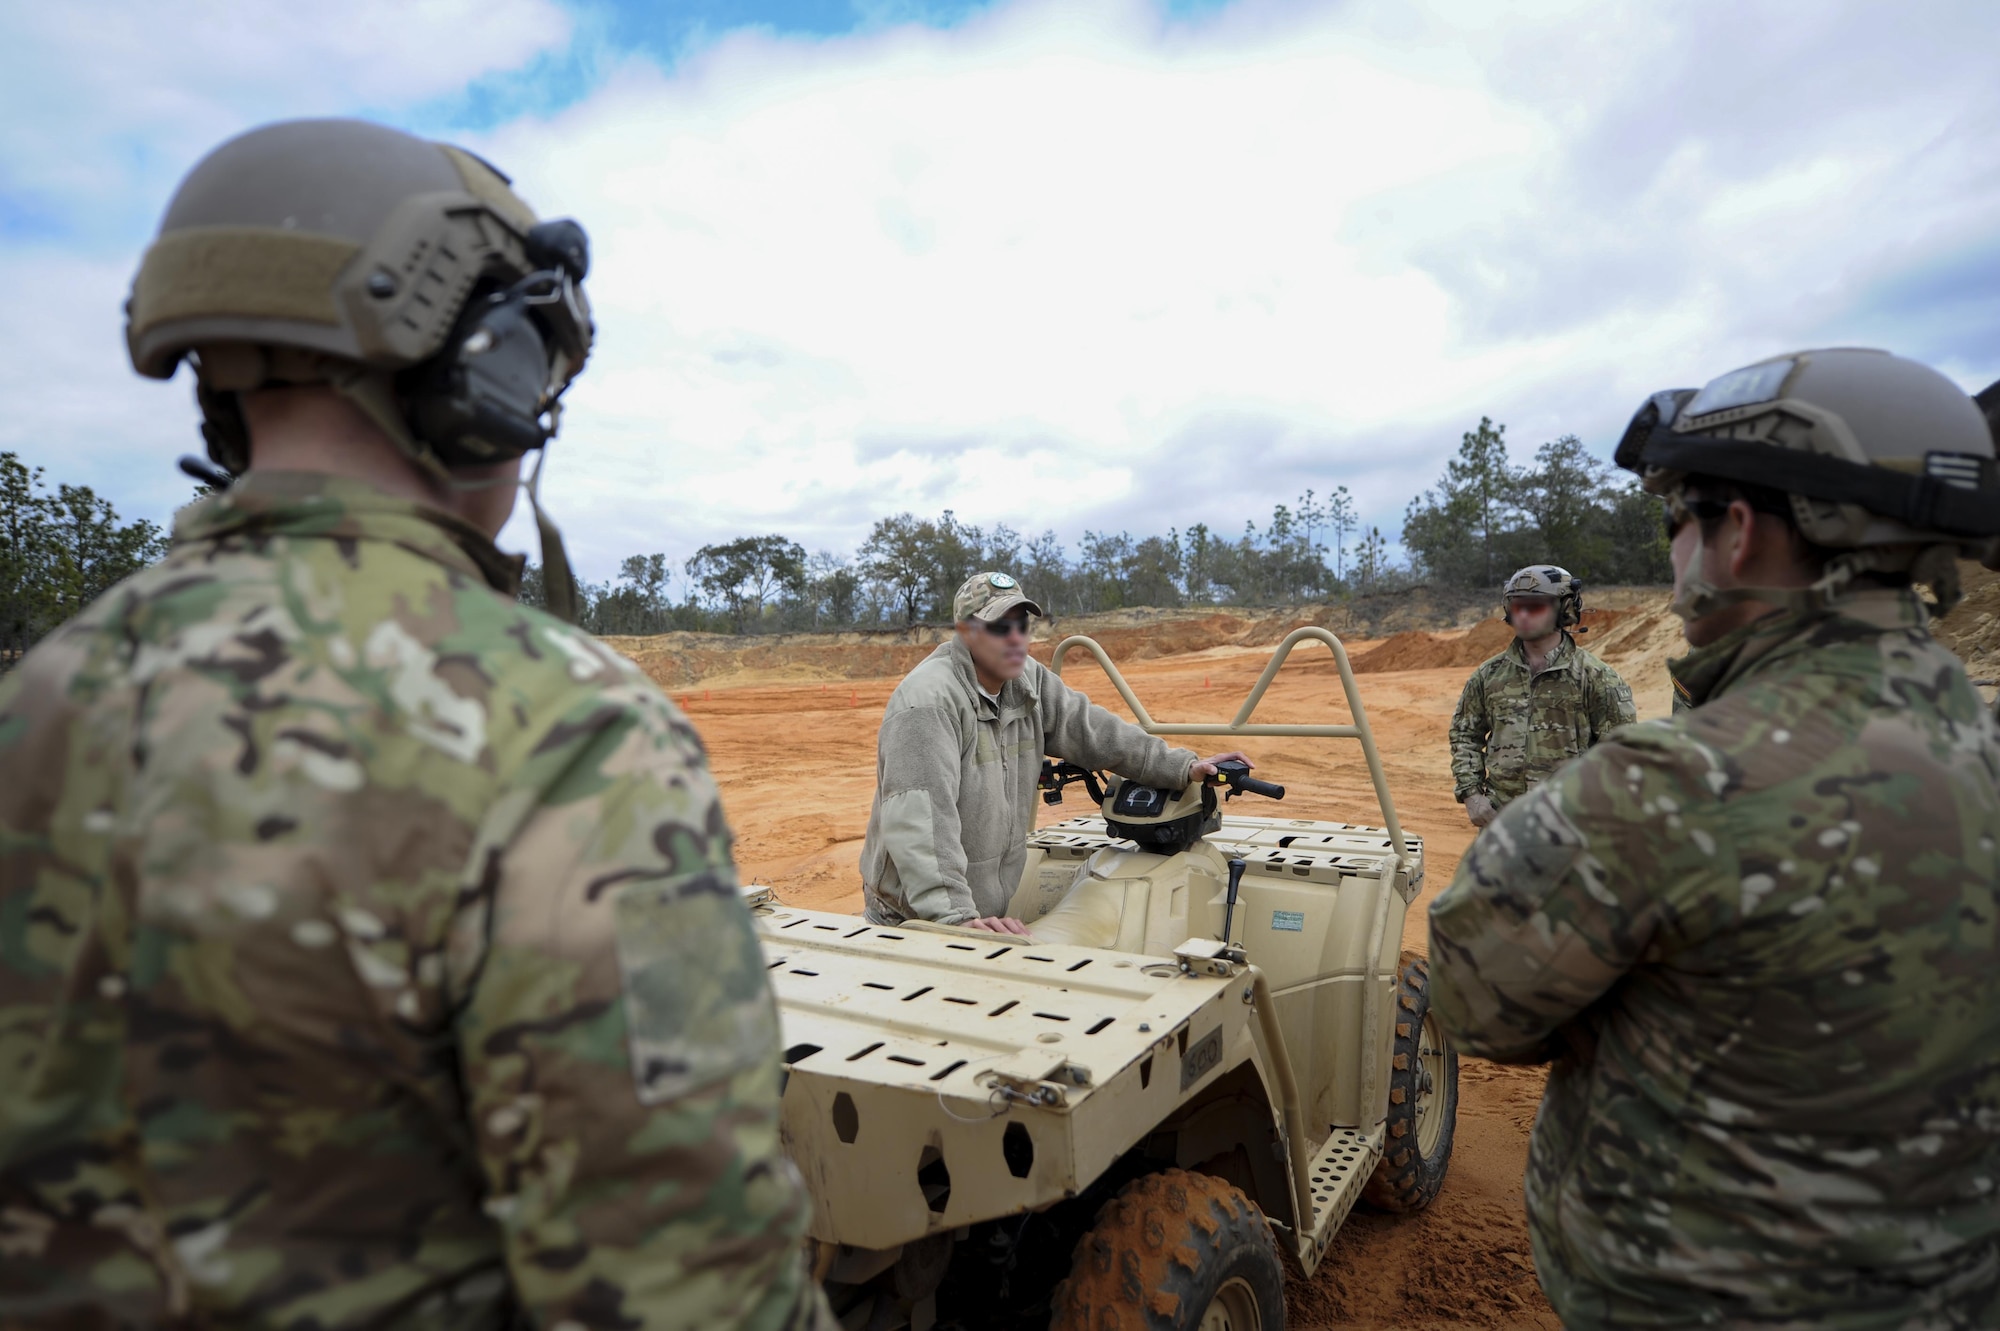 An instructor with the 1st Special Operations Support Squadron Operational Support Joint Office, briefs a team of Soldiers on various all-terrain vehicle operations at Buck Pond in Navarre, Fla., March 14, 2017. The 1st SOSS/OSJ instructor taught a team from the 1st Battalion, 10th Special Forces Group, how to safely turn by adjusting body weight, how to stop properly and how to safely climb a hill. (U.S. Air Force photo by Airman 1st Class Dennis Spain)